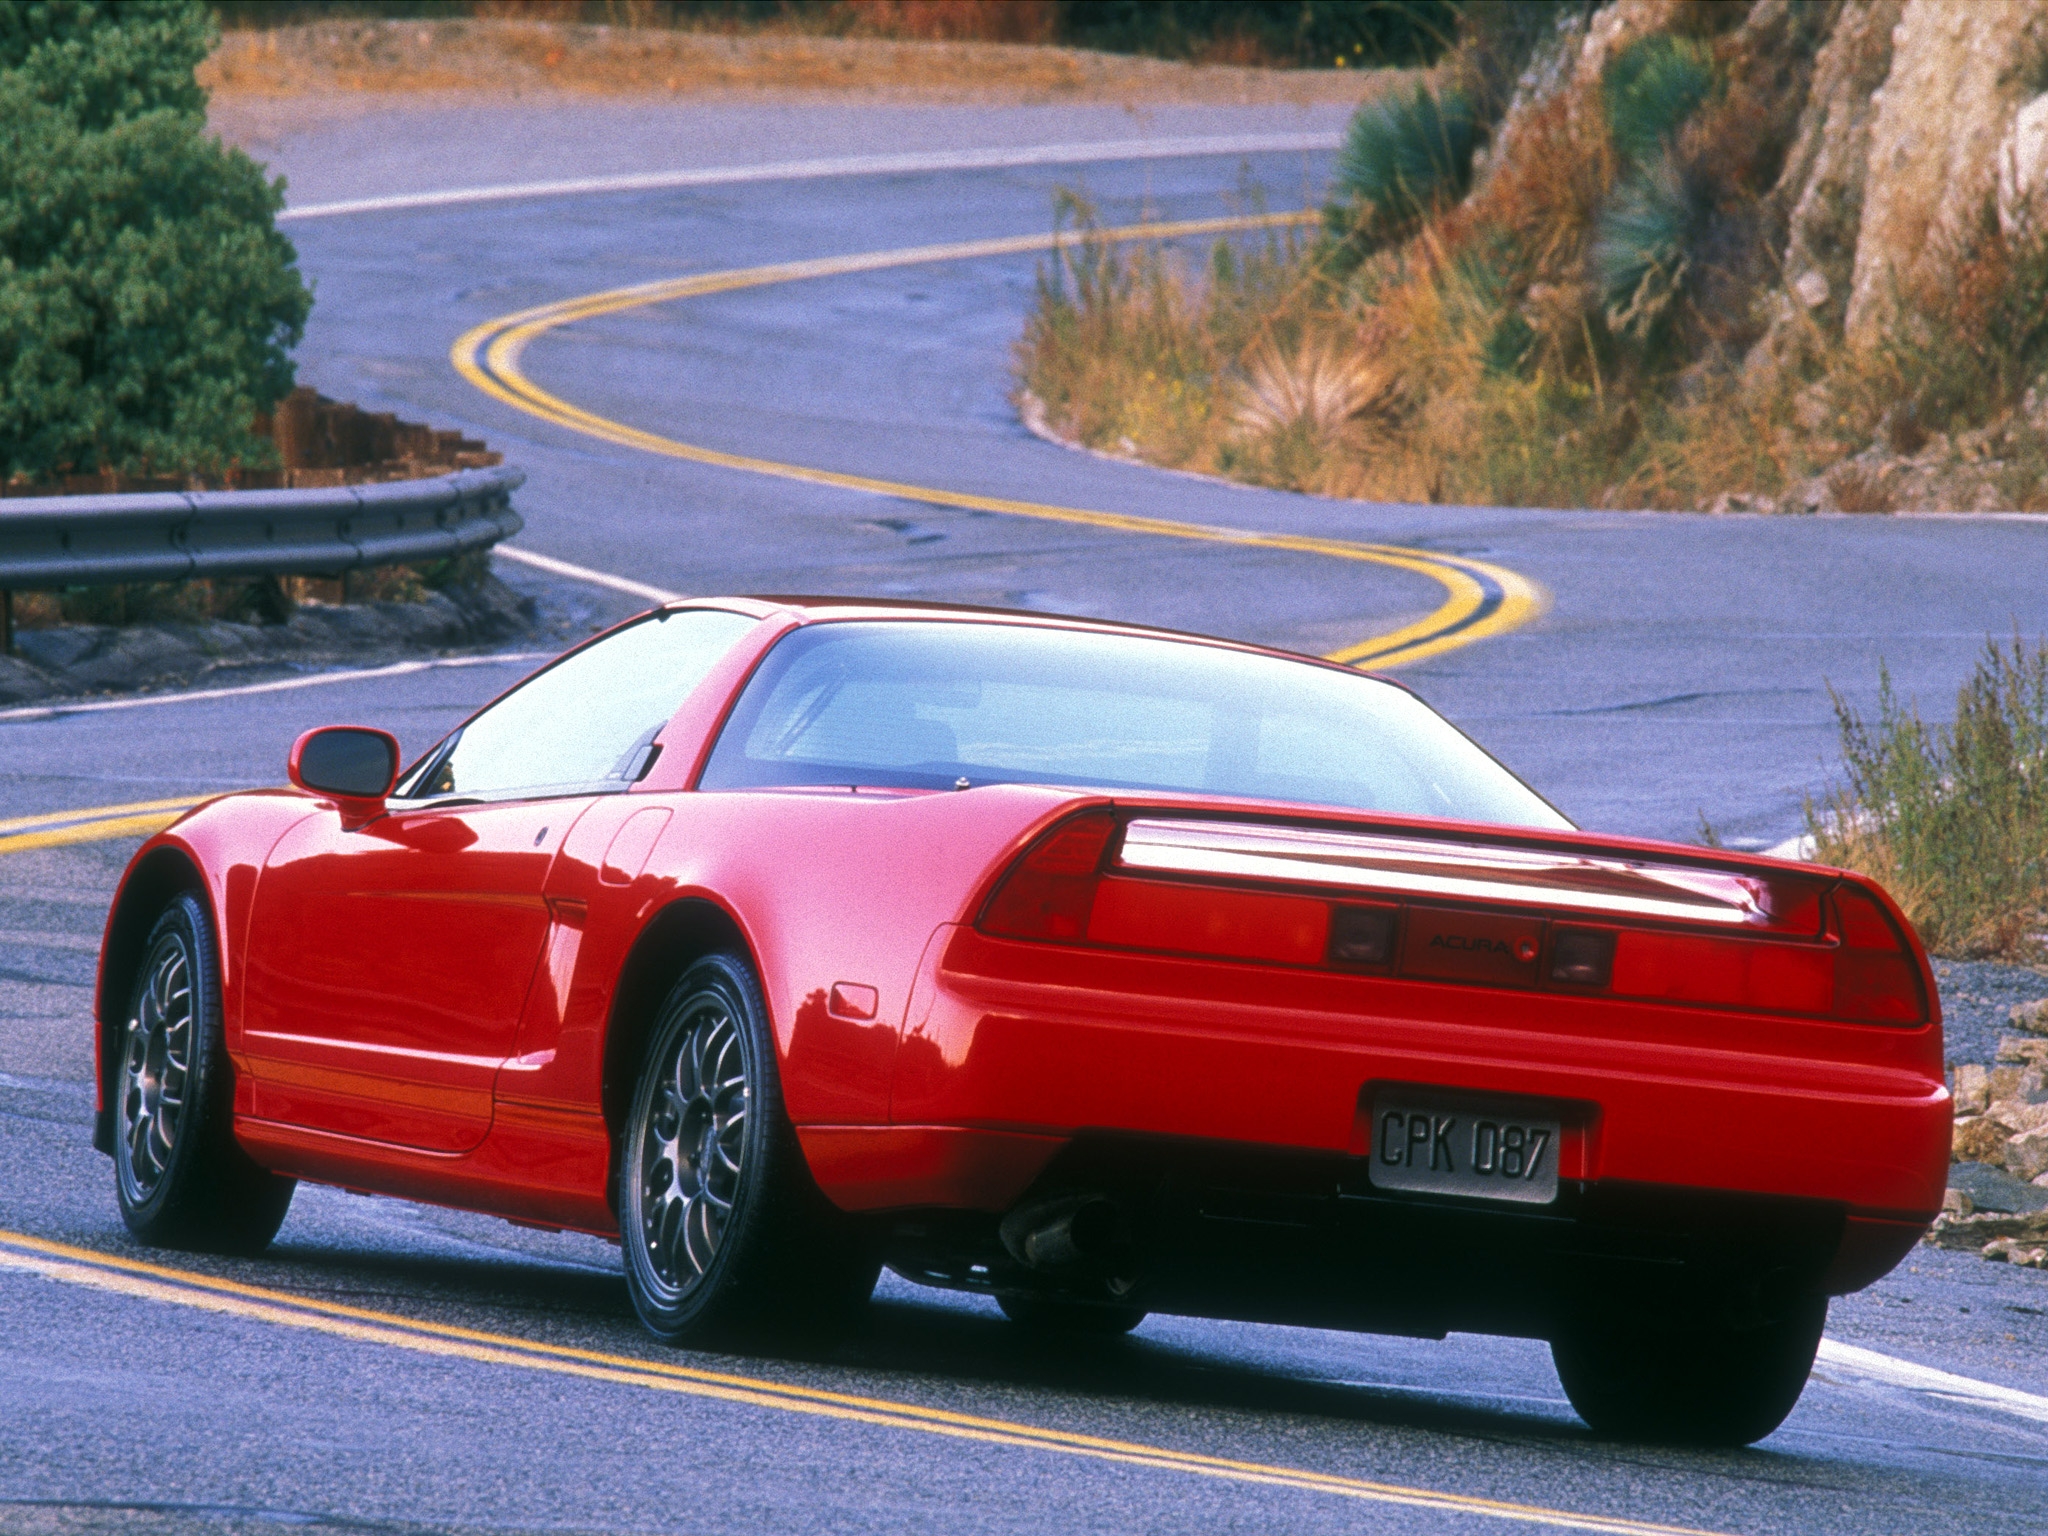 sports, auto, nature, acura, cars, red, rocks, road, back view, rear view, style, akura, 1999, nsx, hsx, nsh